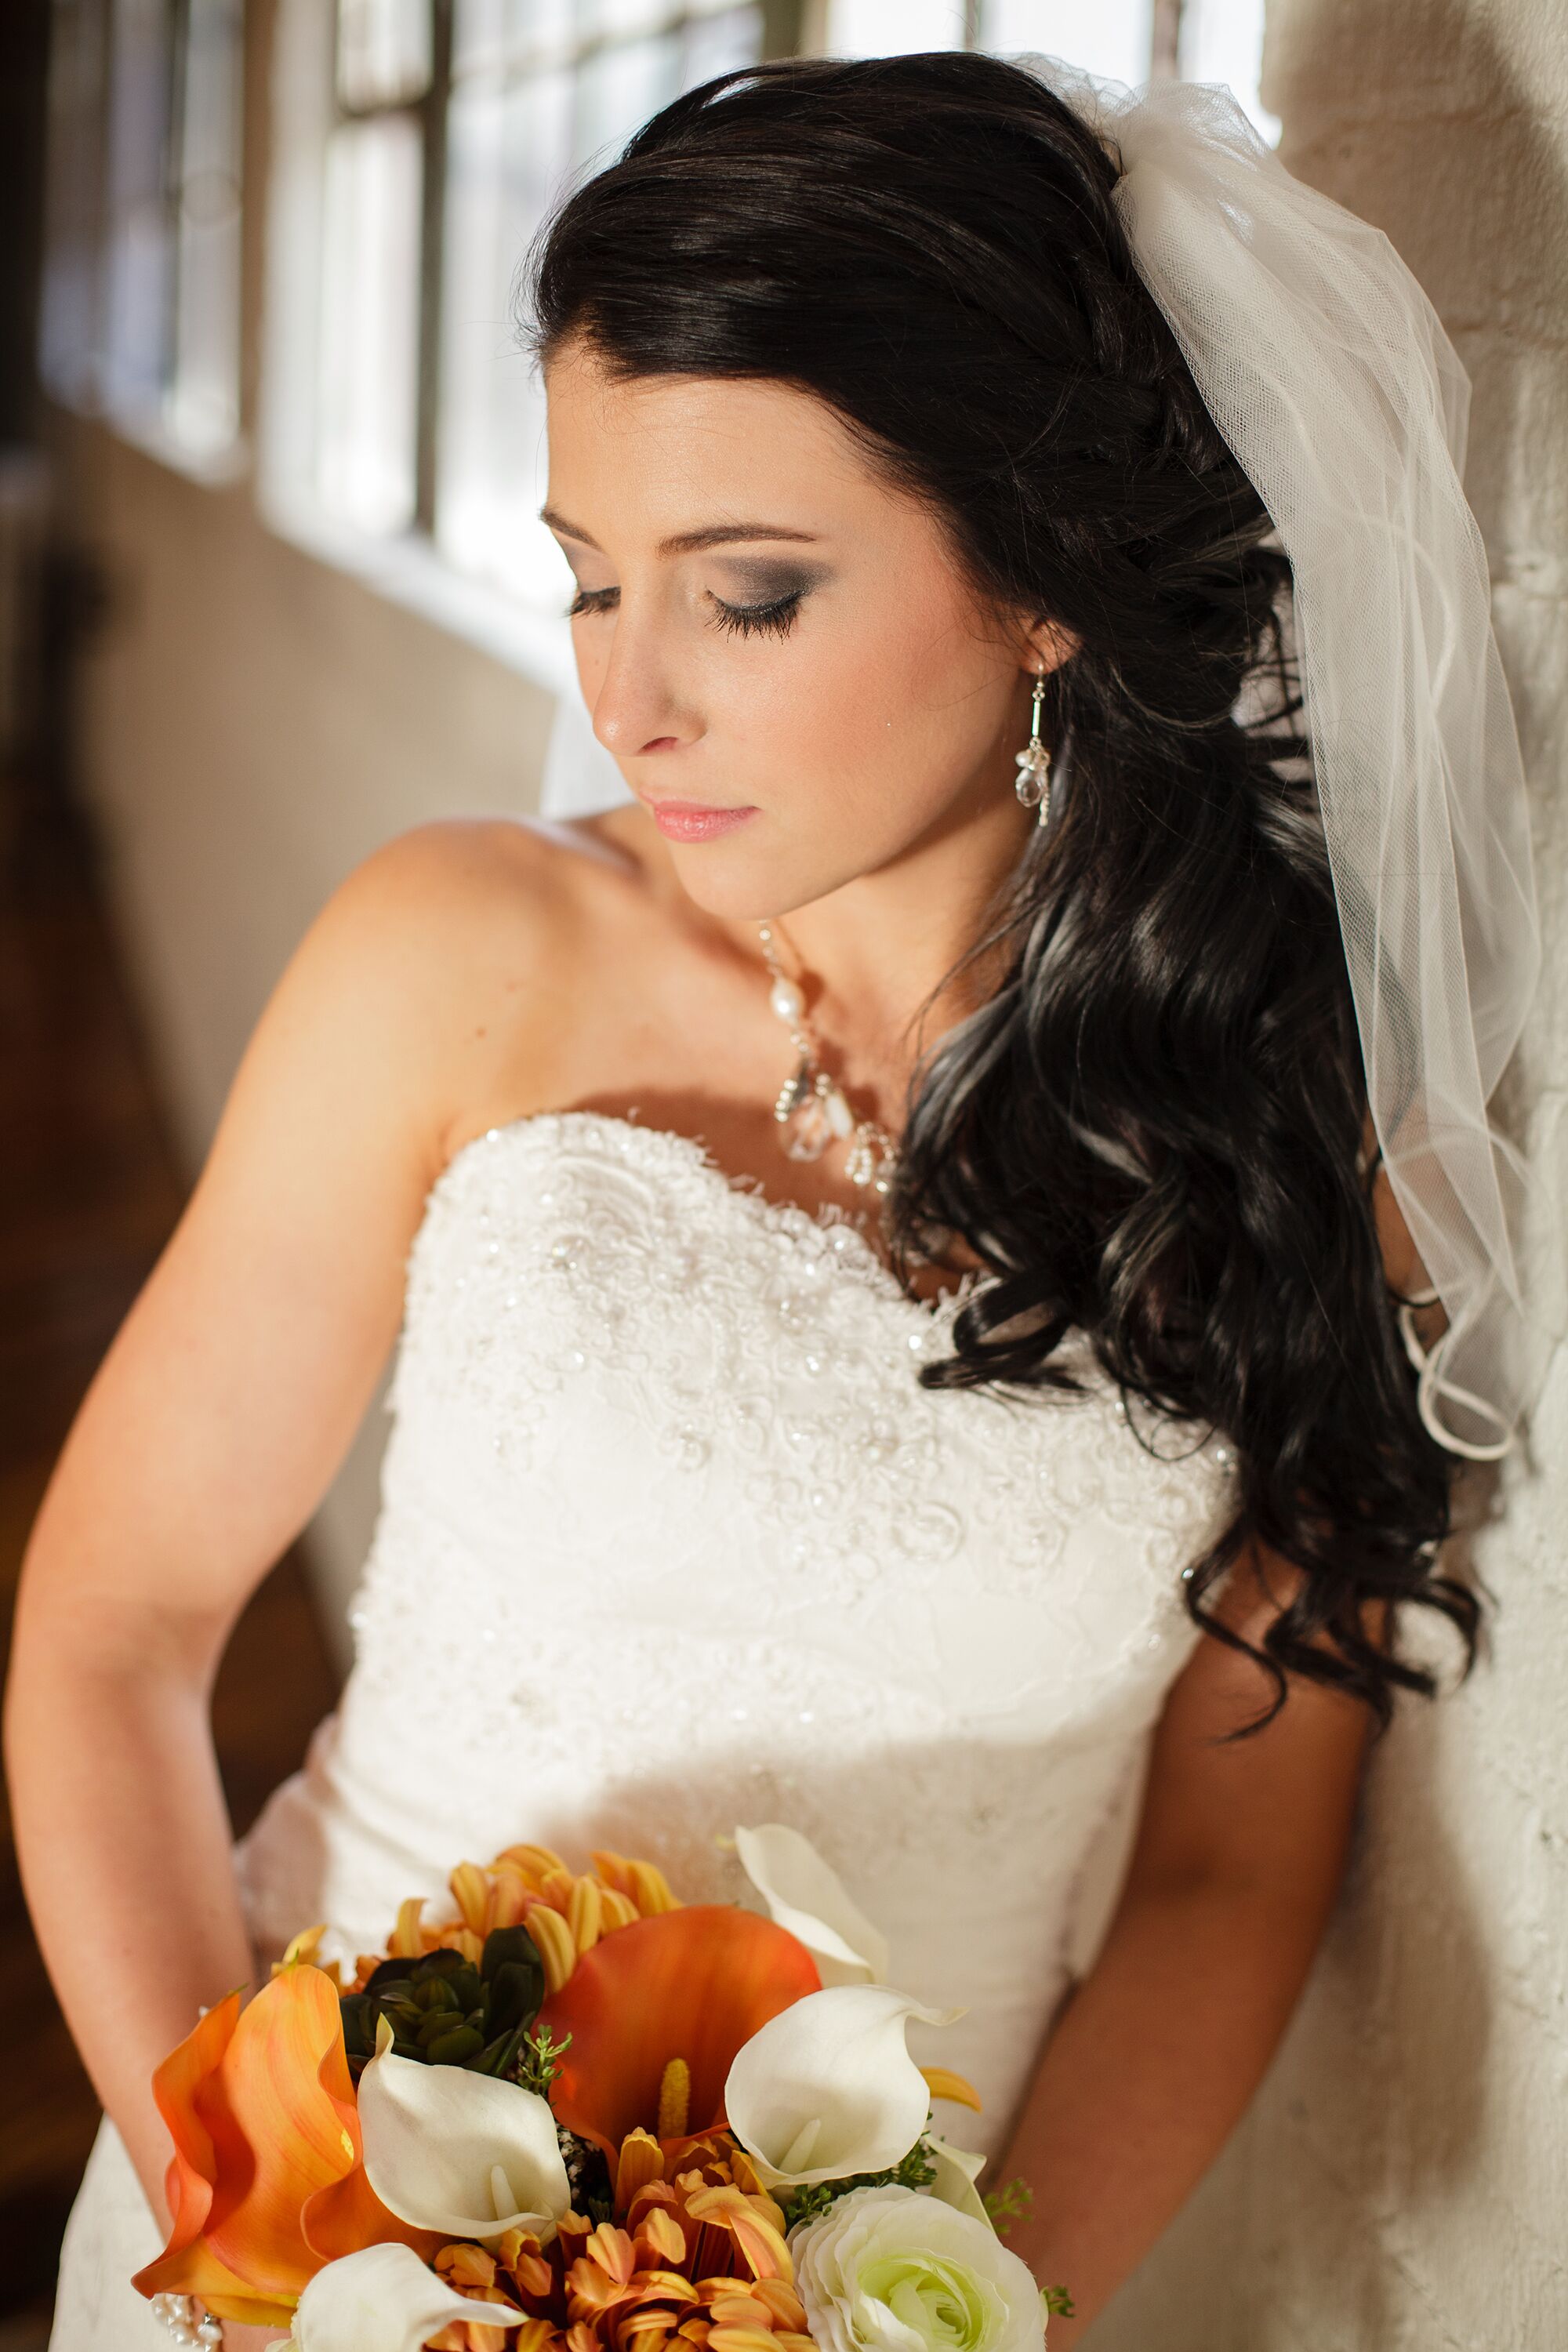 Curled, Side Updo with Veil